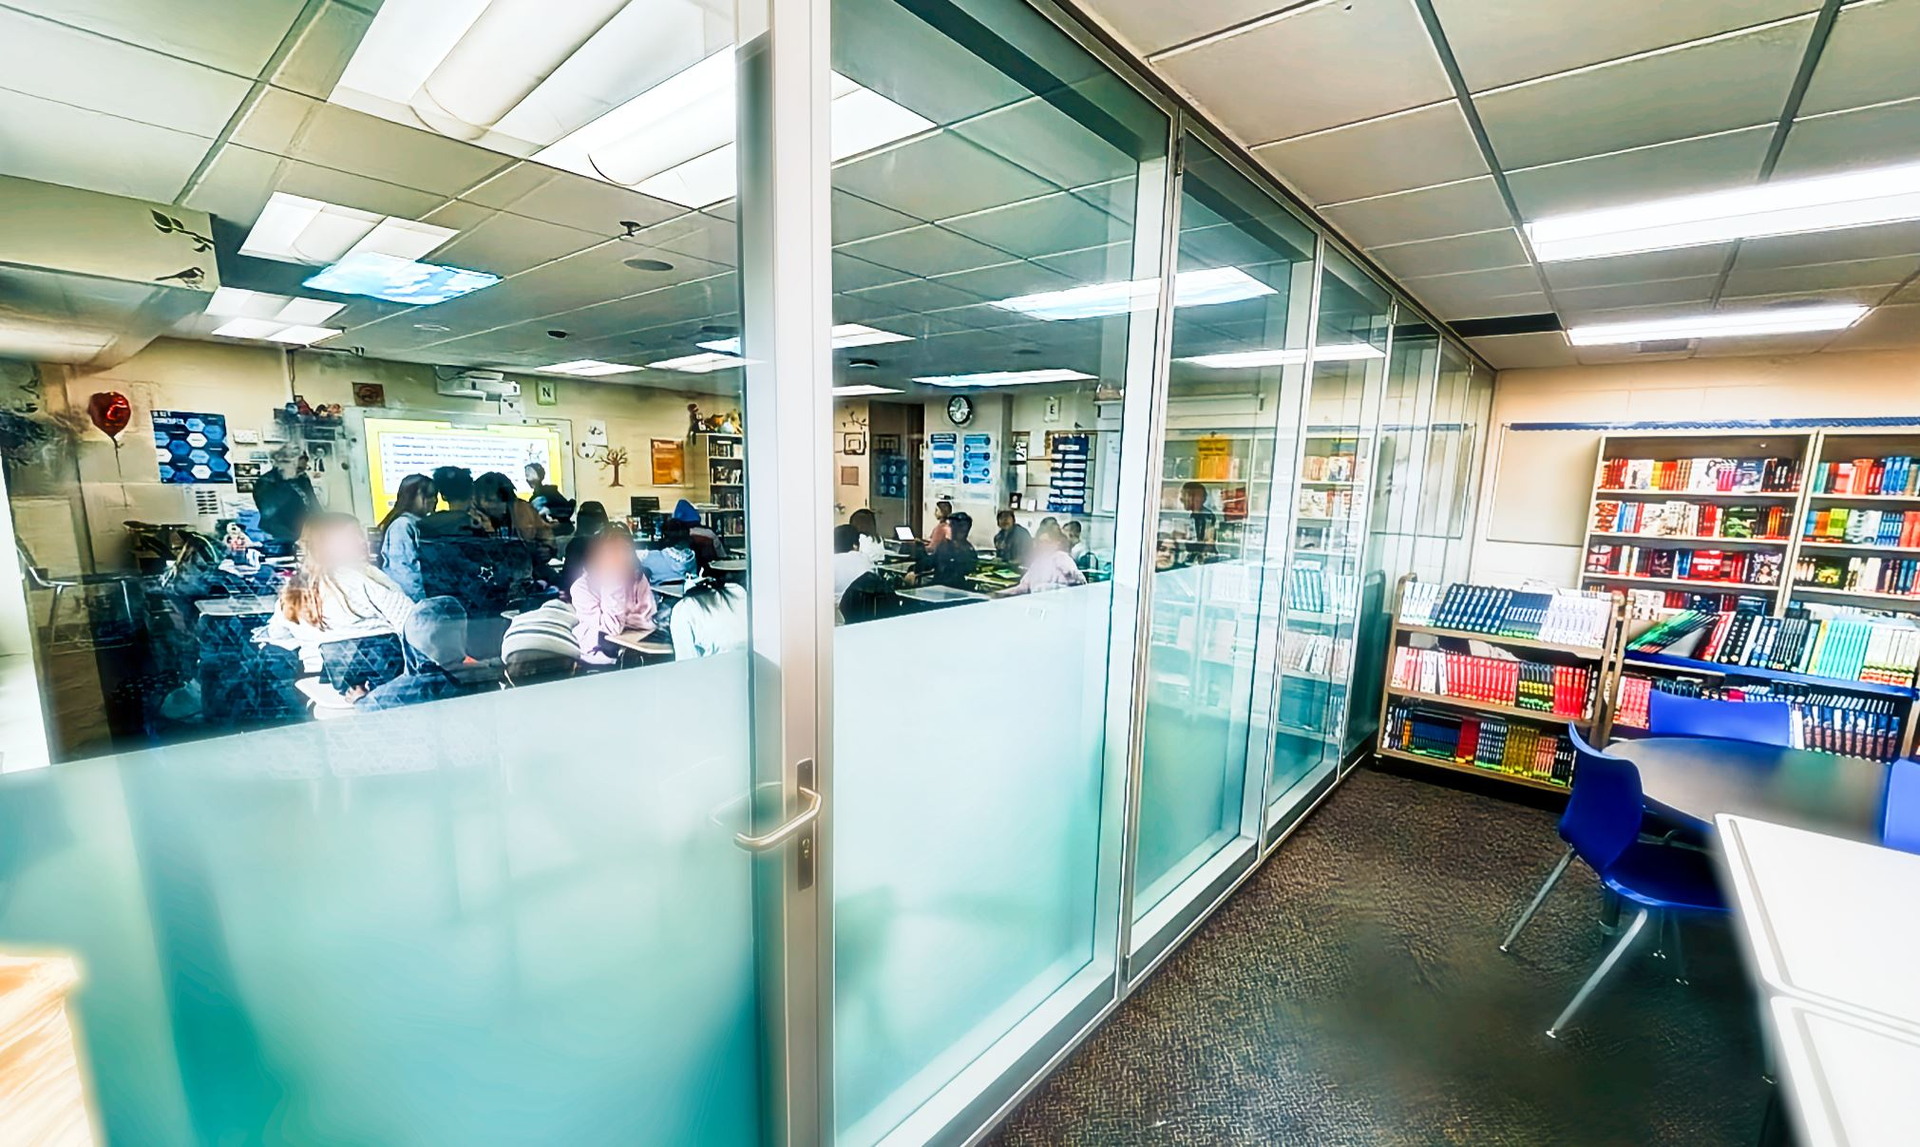 w l hall company Hopkins Senior High & West Junior High Schools Utilize ZONA & Modernfold Glass Walls for Collaborative, Safe and Flexible Learning Environments 4